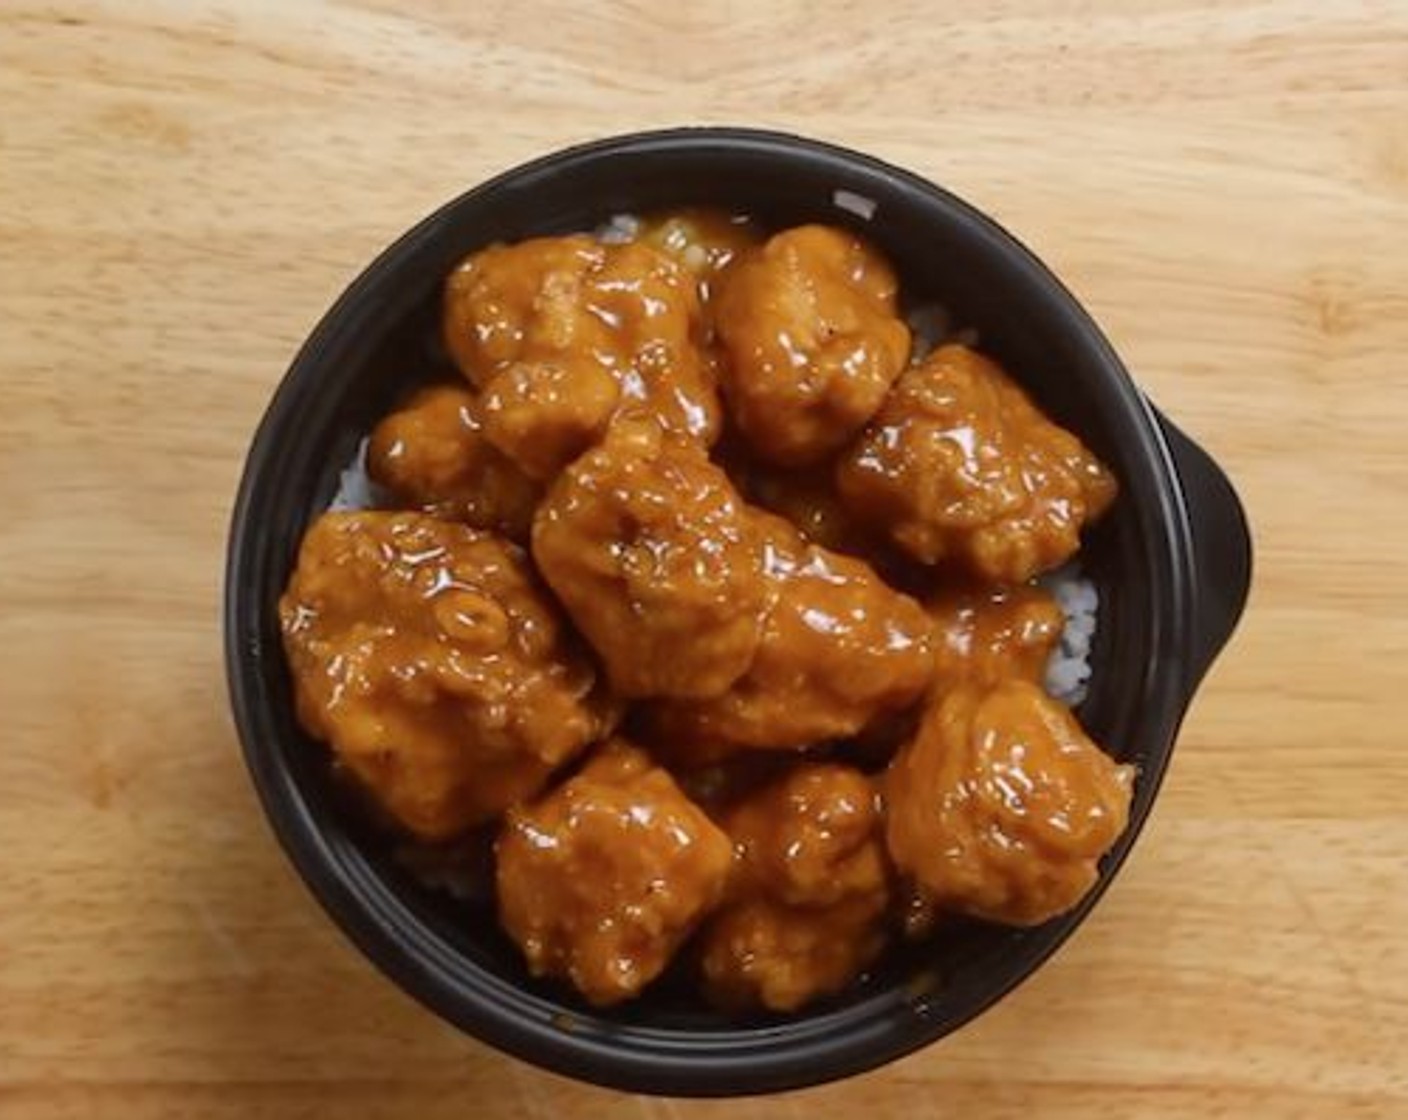 step 8 To serve add White Rice (to taste) into a bowl and place orange chicken on top. Enjoy!